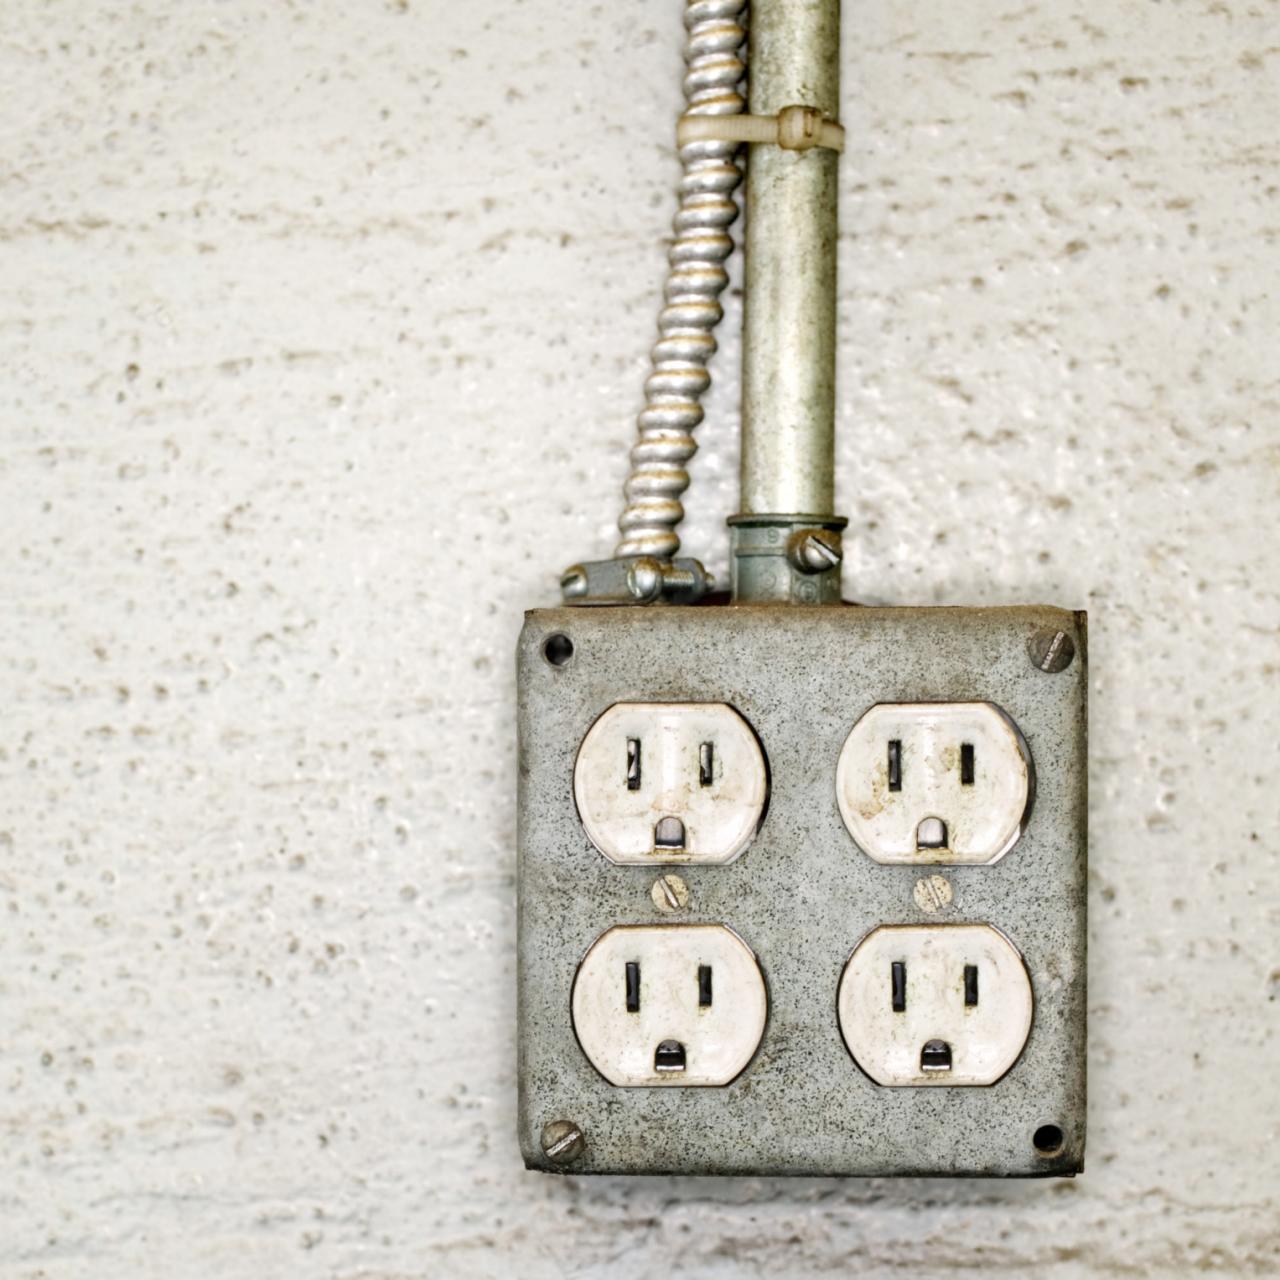 How to Install an Exterior Electrical Outlet